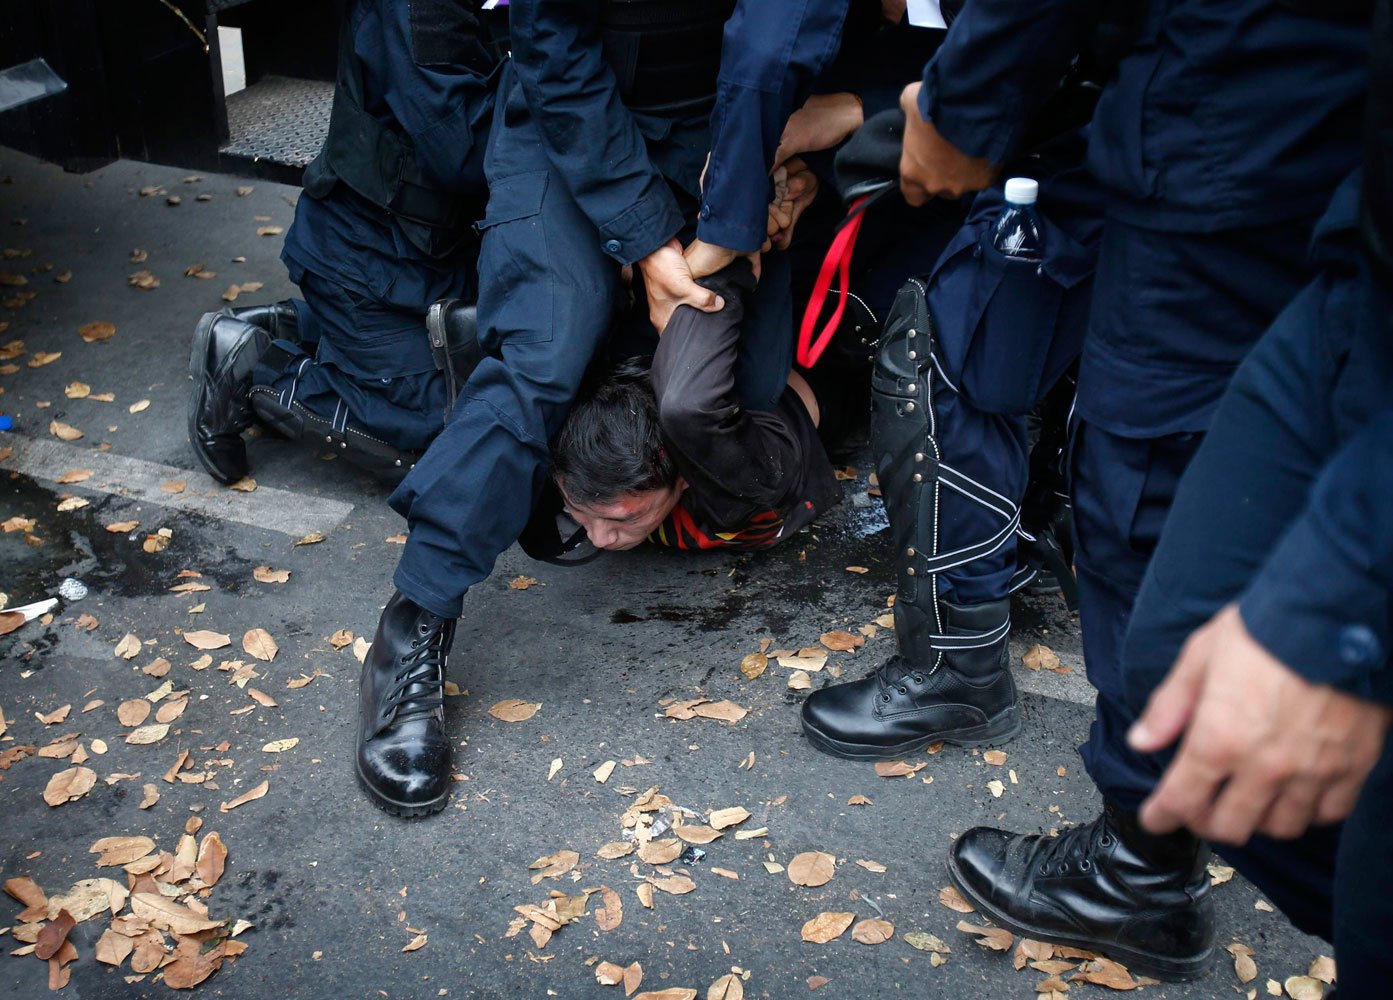 Thai police officers detain an anti-government protester near Government House in Bangkok, on Feb. 18, 2014.